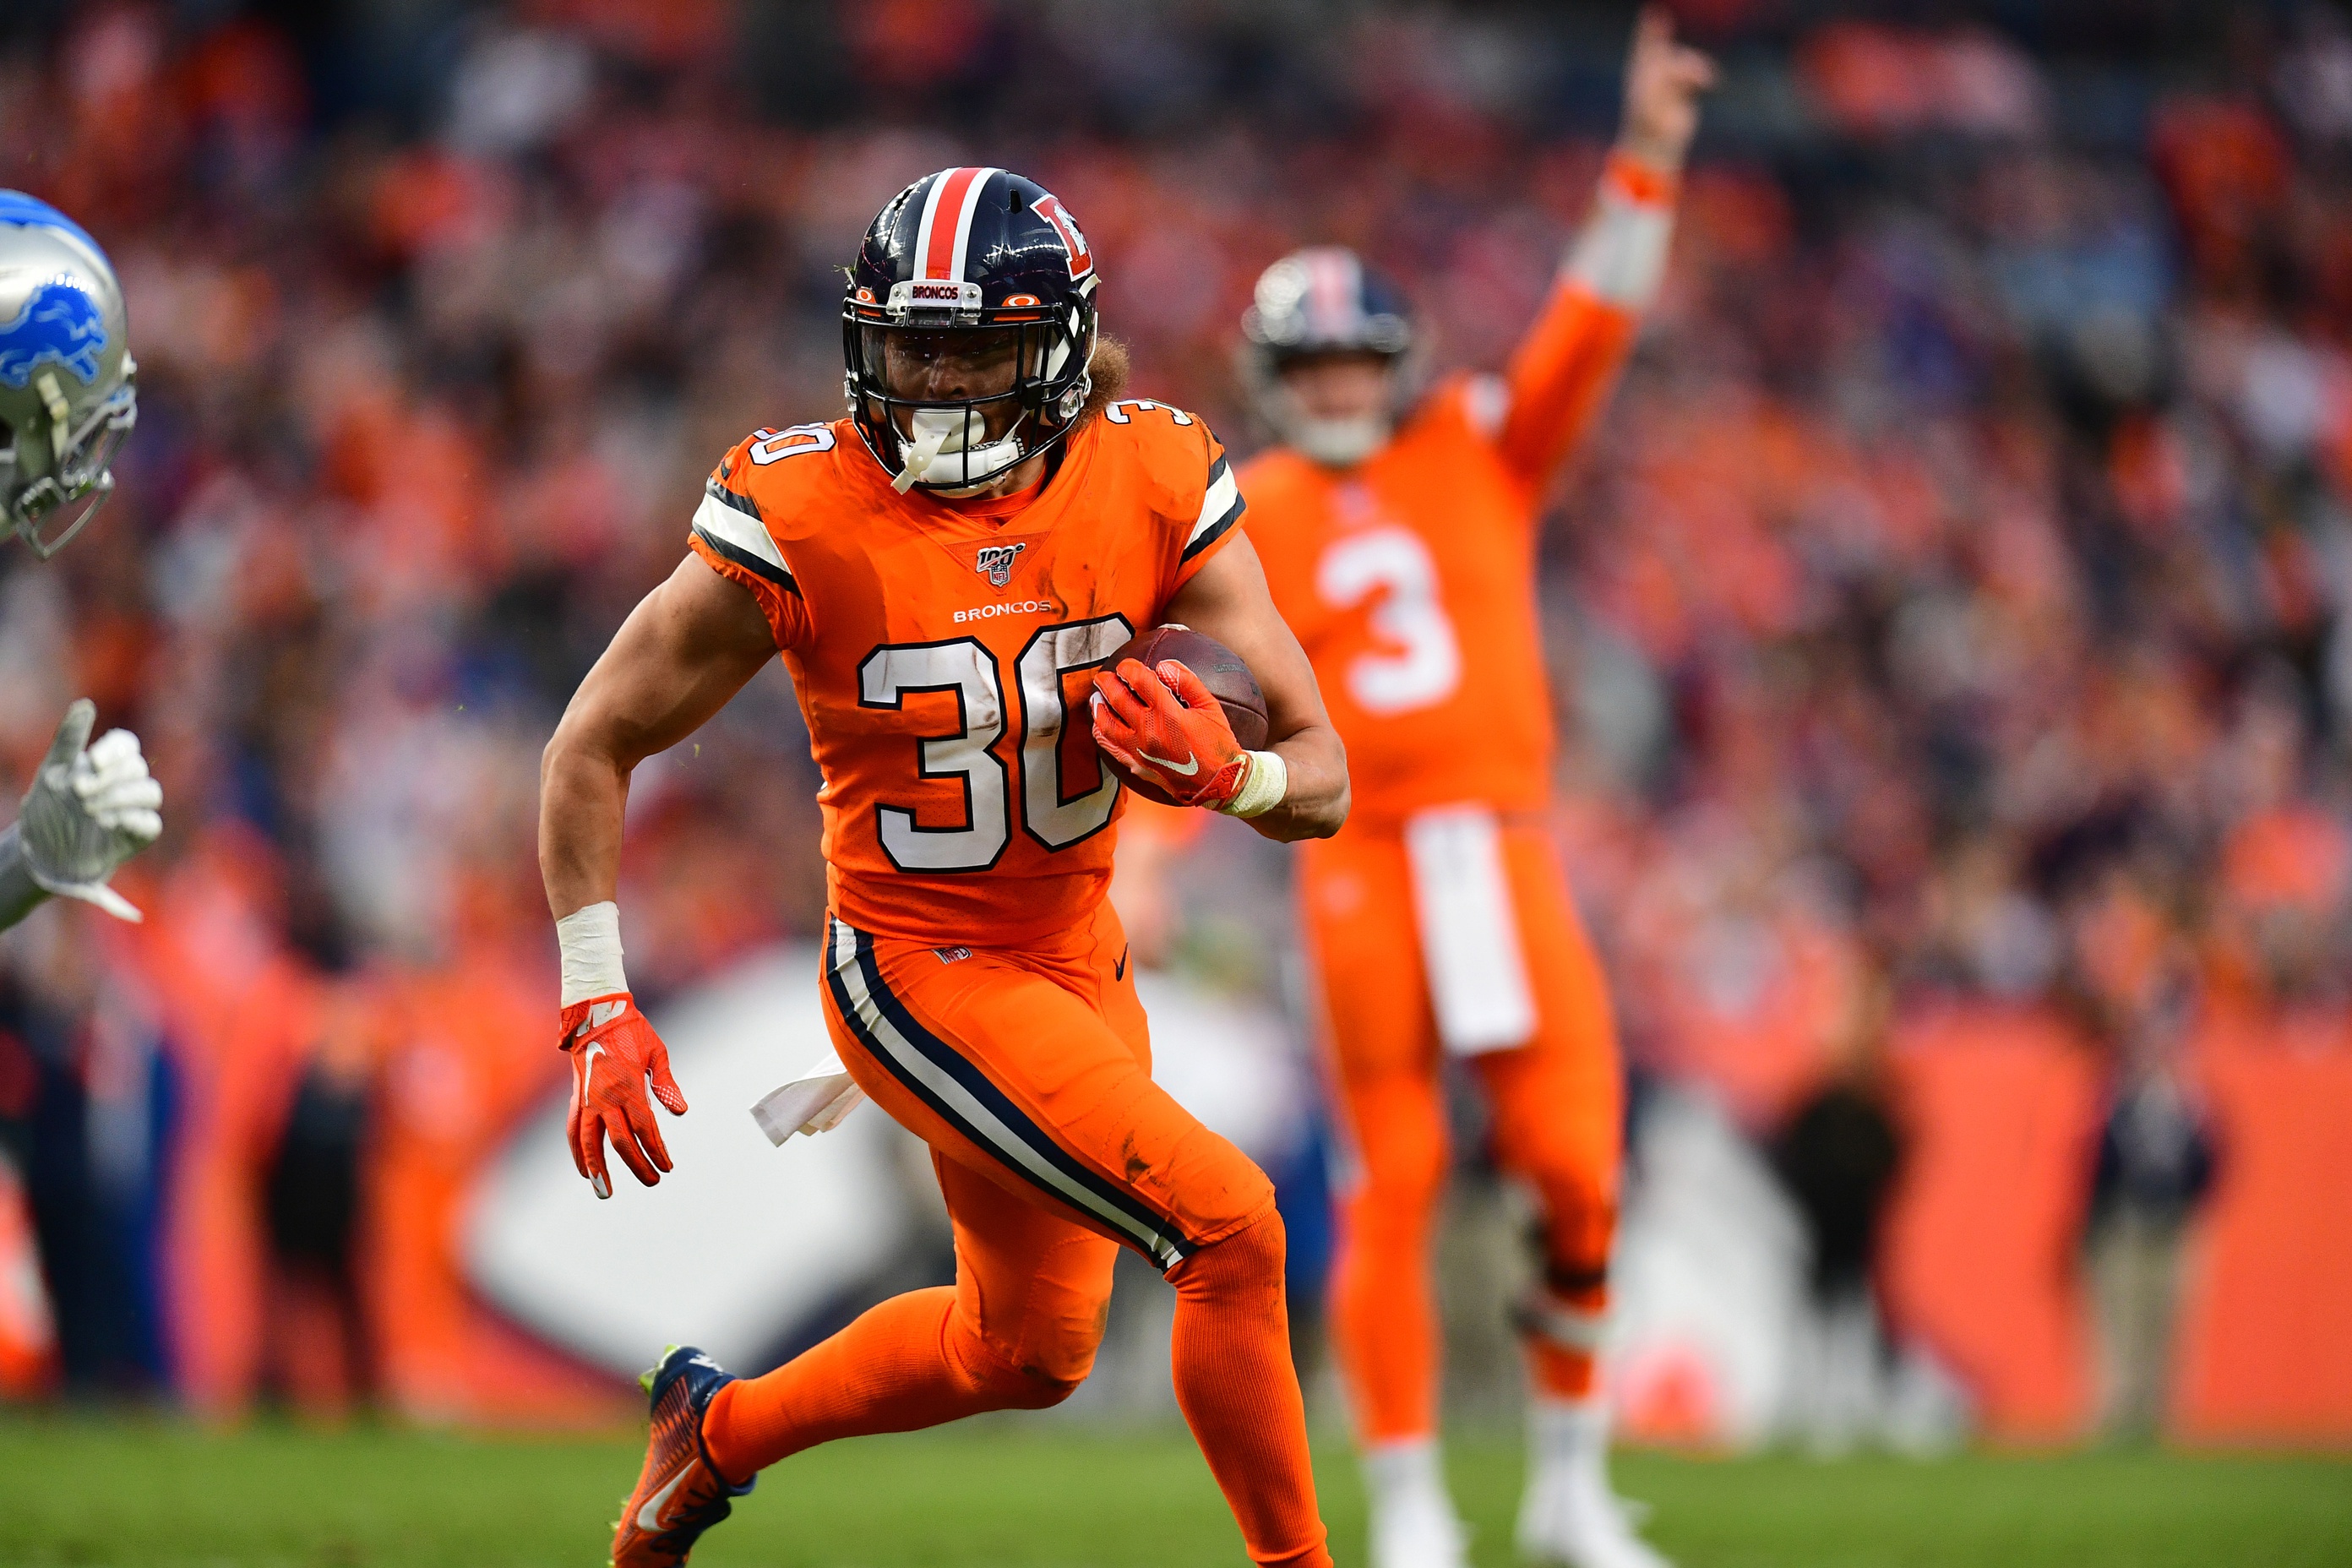 phillip lindsay color rush jersey